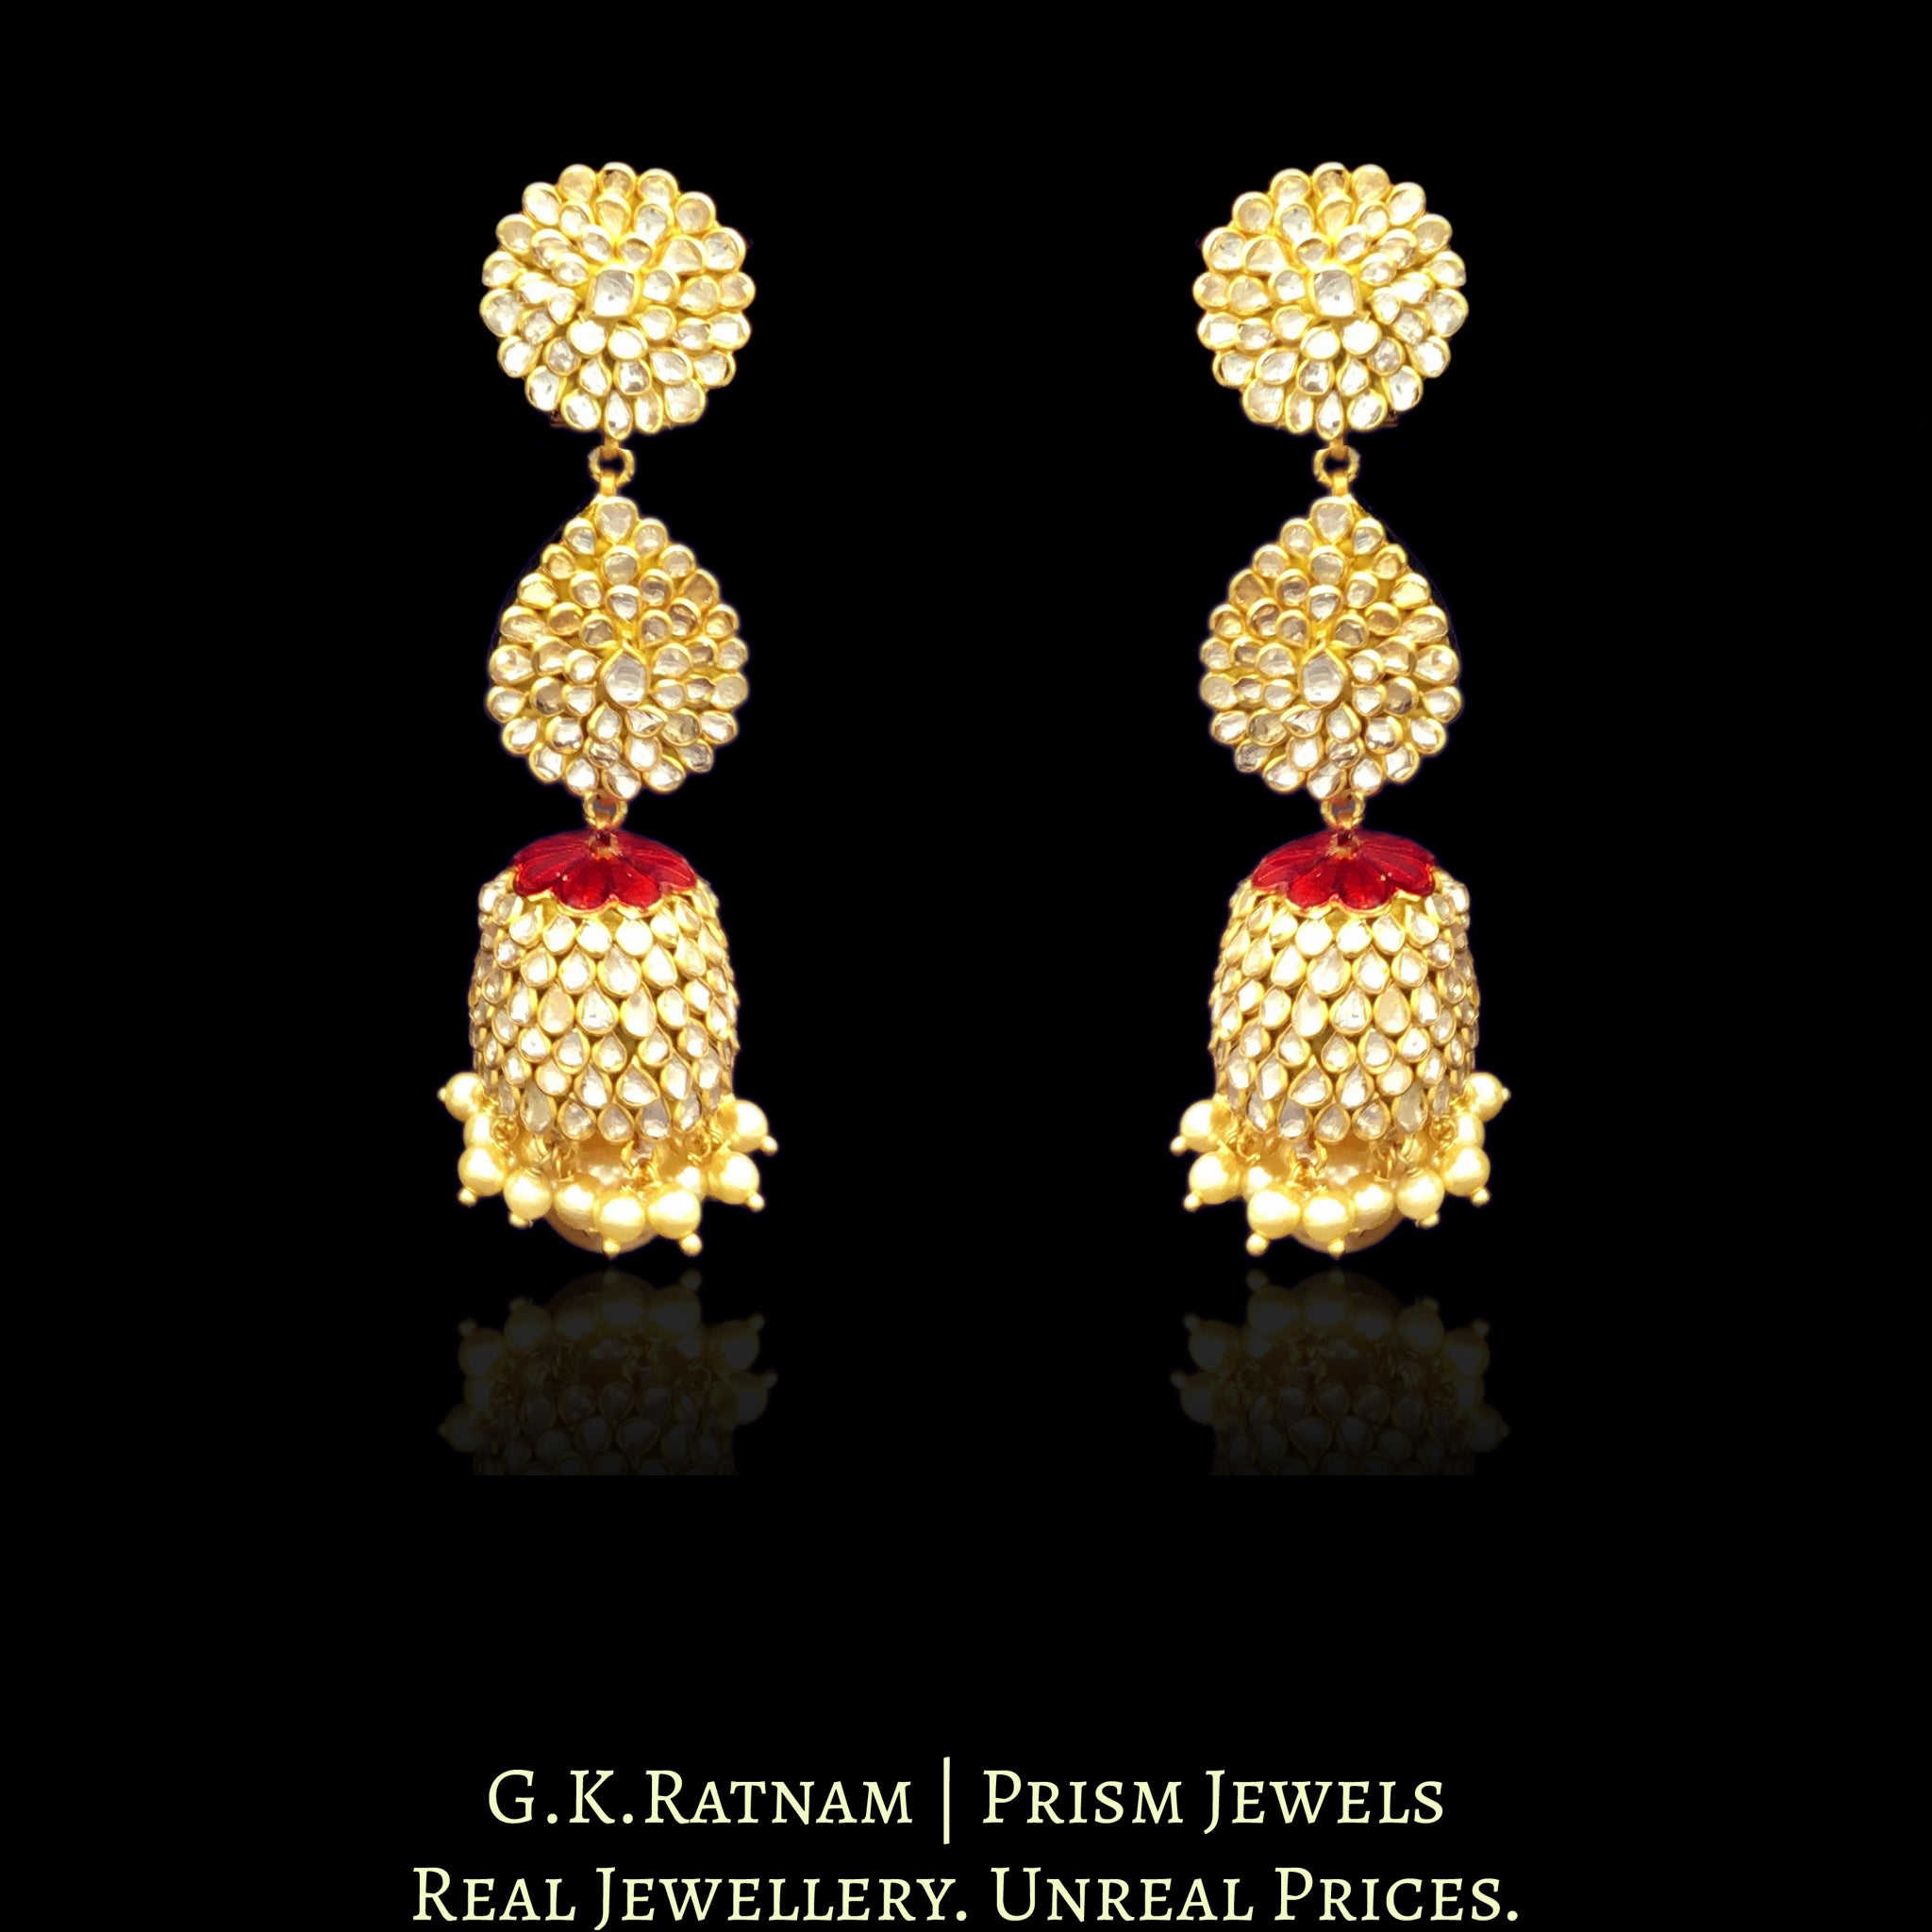 23k Gold and Diamond Polki three-tier Long Earring Pair with uncut pacchis - G. K. Ratnam